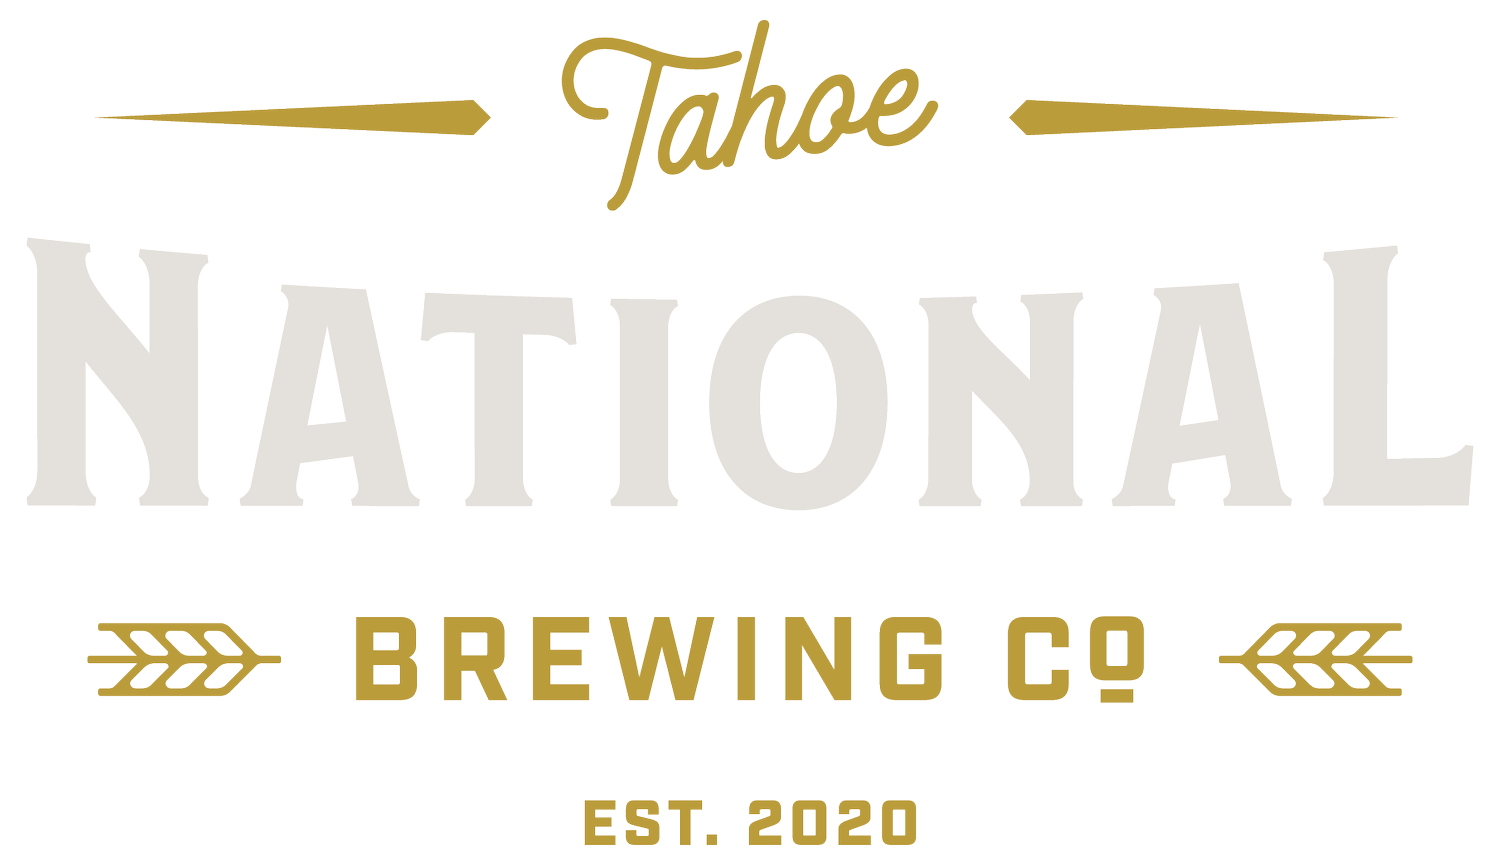 Tahoe National Brewing Co.